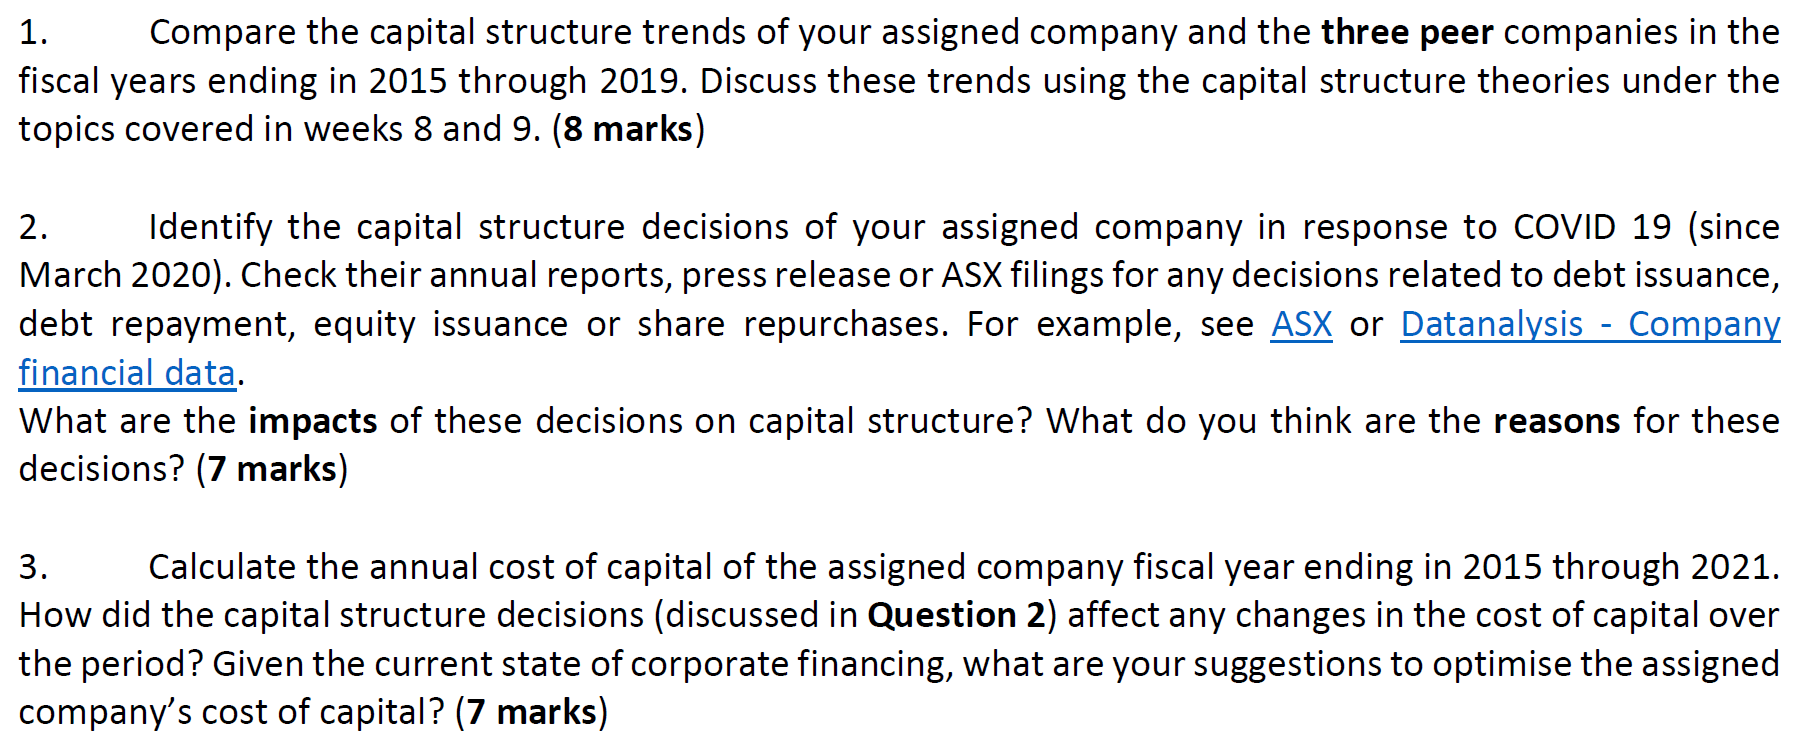 1. Compare the capital structure trends of your assigned company and the three peer companies in the fiscal years ending in 2